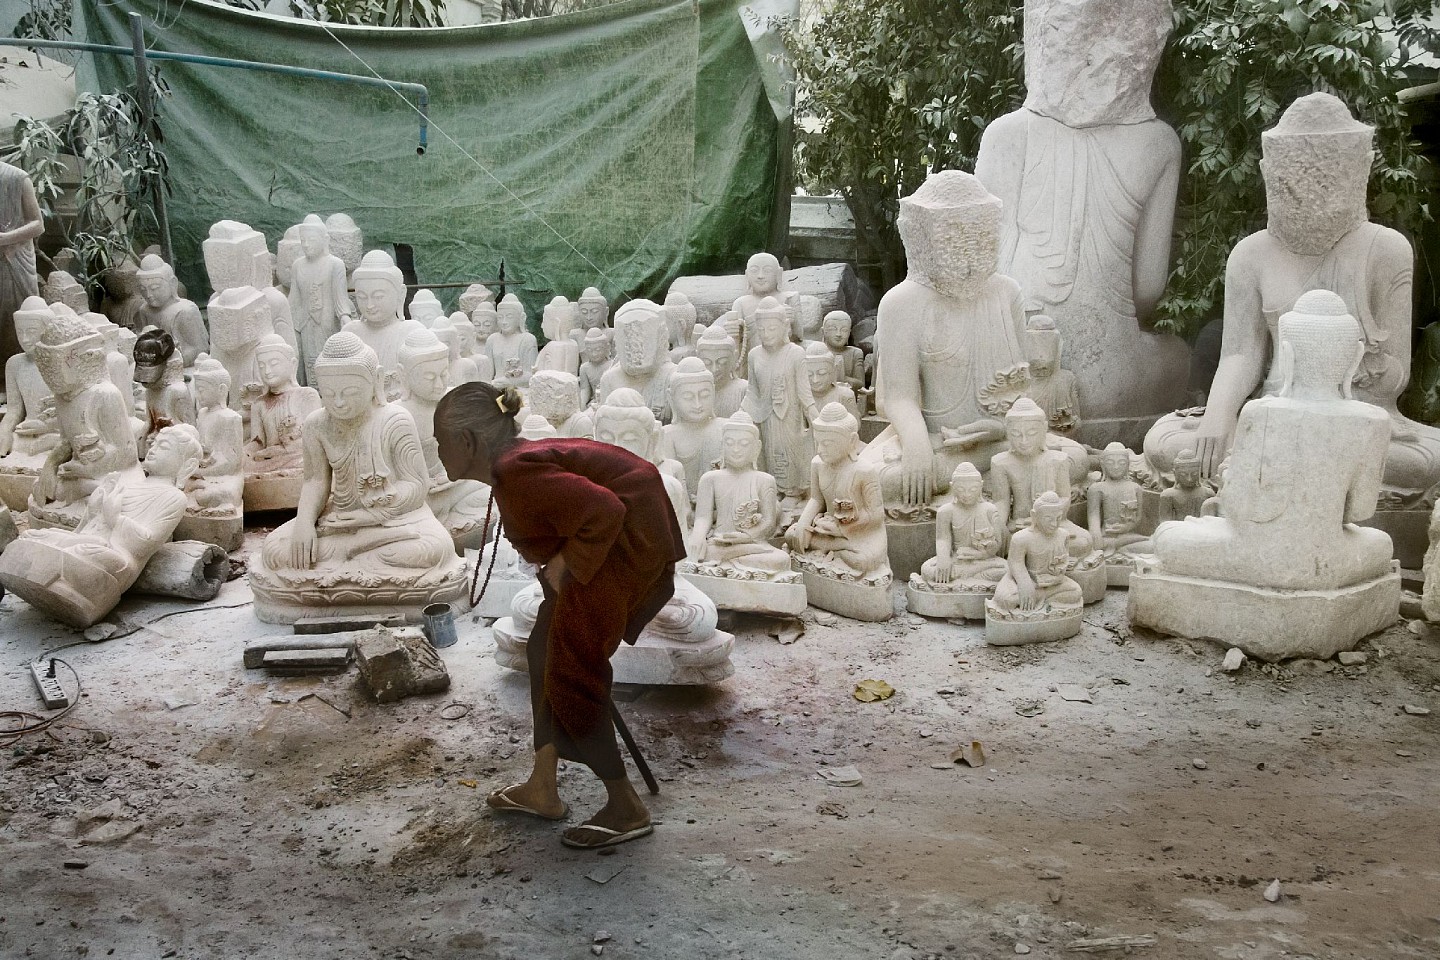 Steve McCurry, Woman in Sculpture Yard, 2013
FujiFlex Crystal Archive Print
Price/Size on request